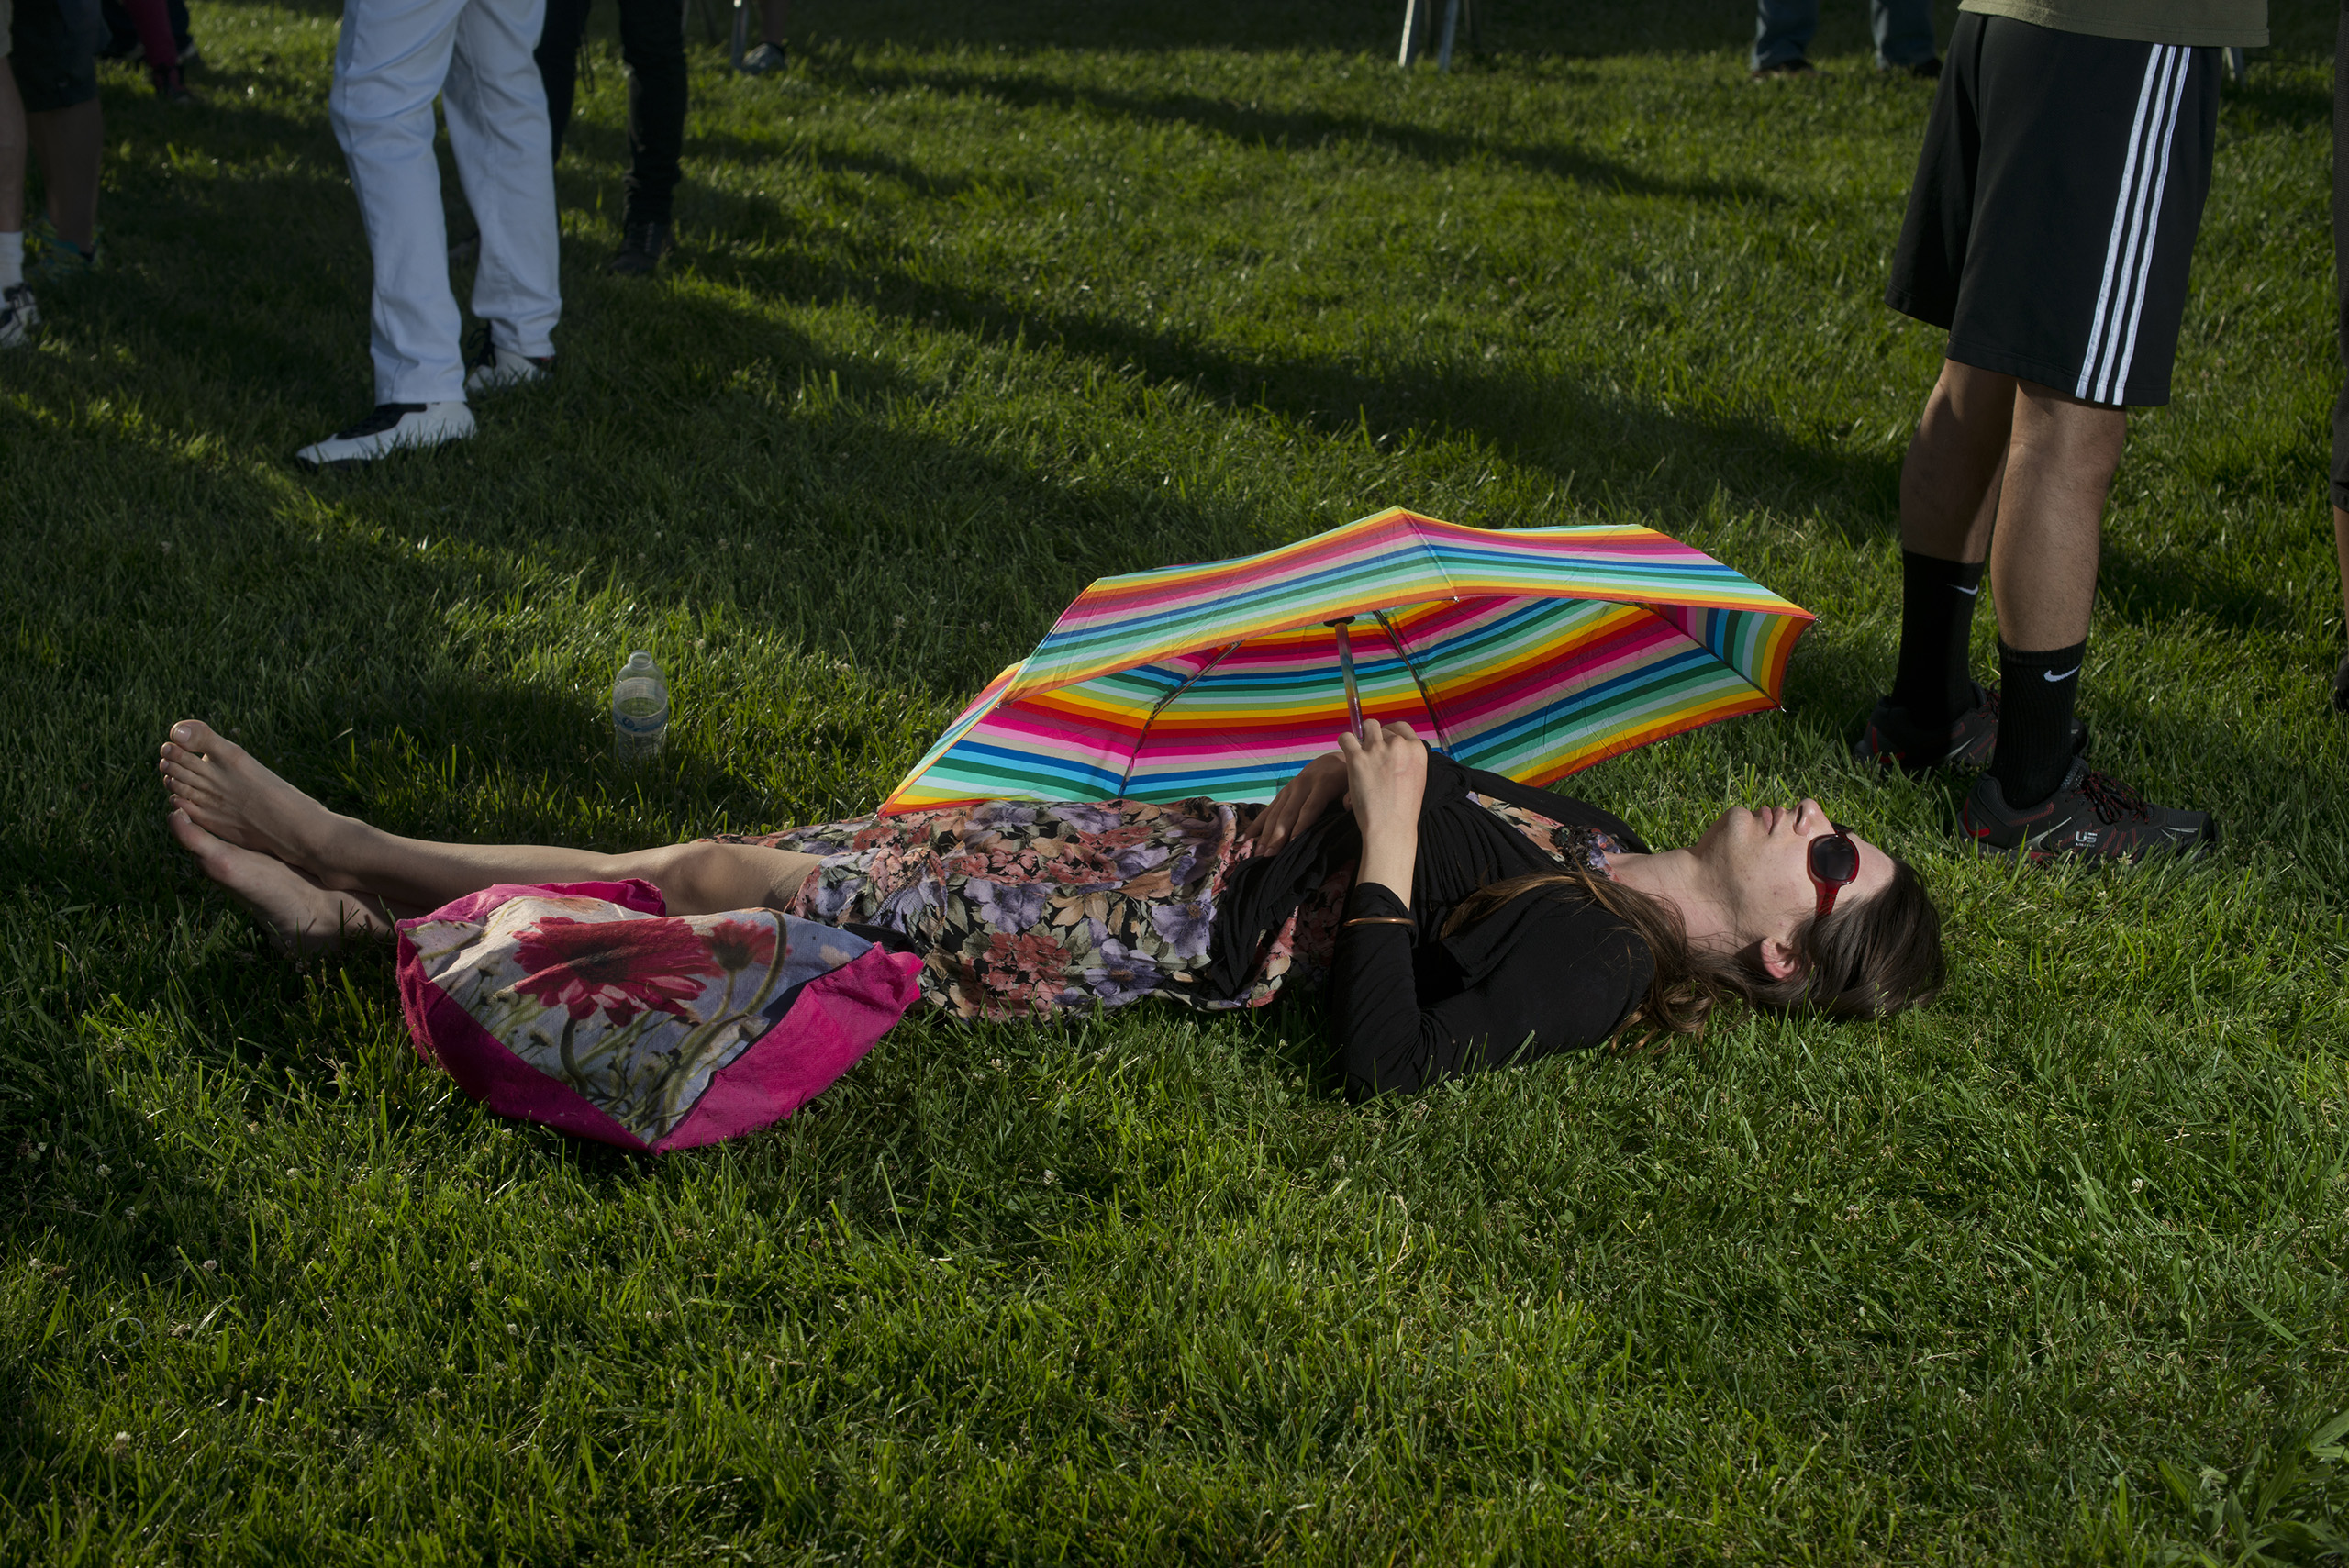 A woman sunbathes at a Bernie Sanders campaign rally at Waterfront Park in Vallejo, Calif., May 18, 2016.